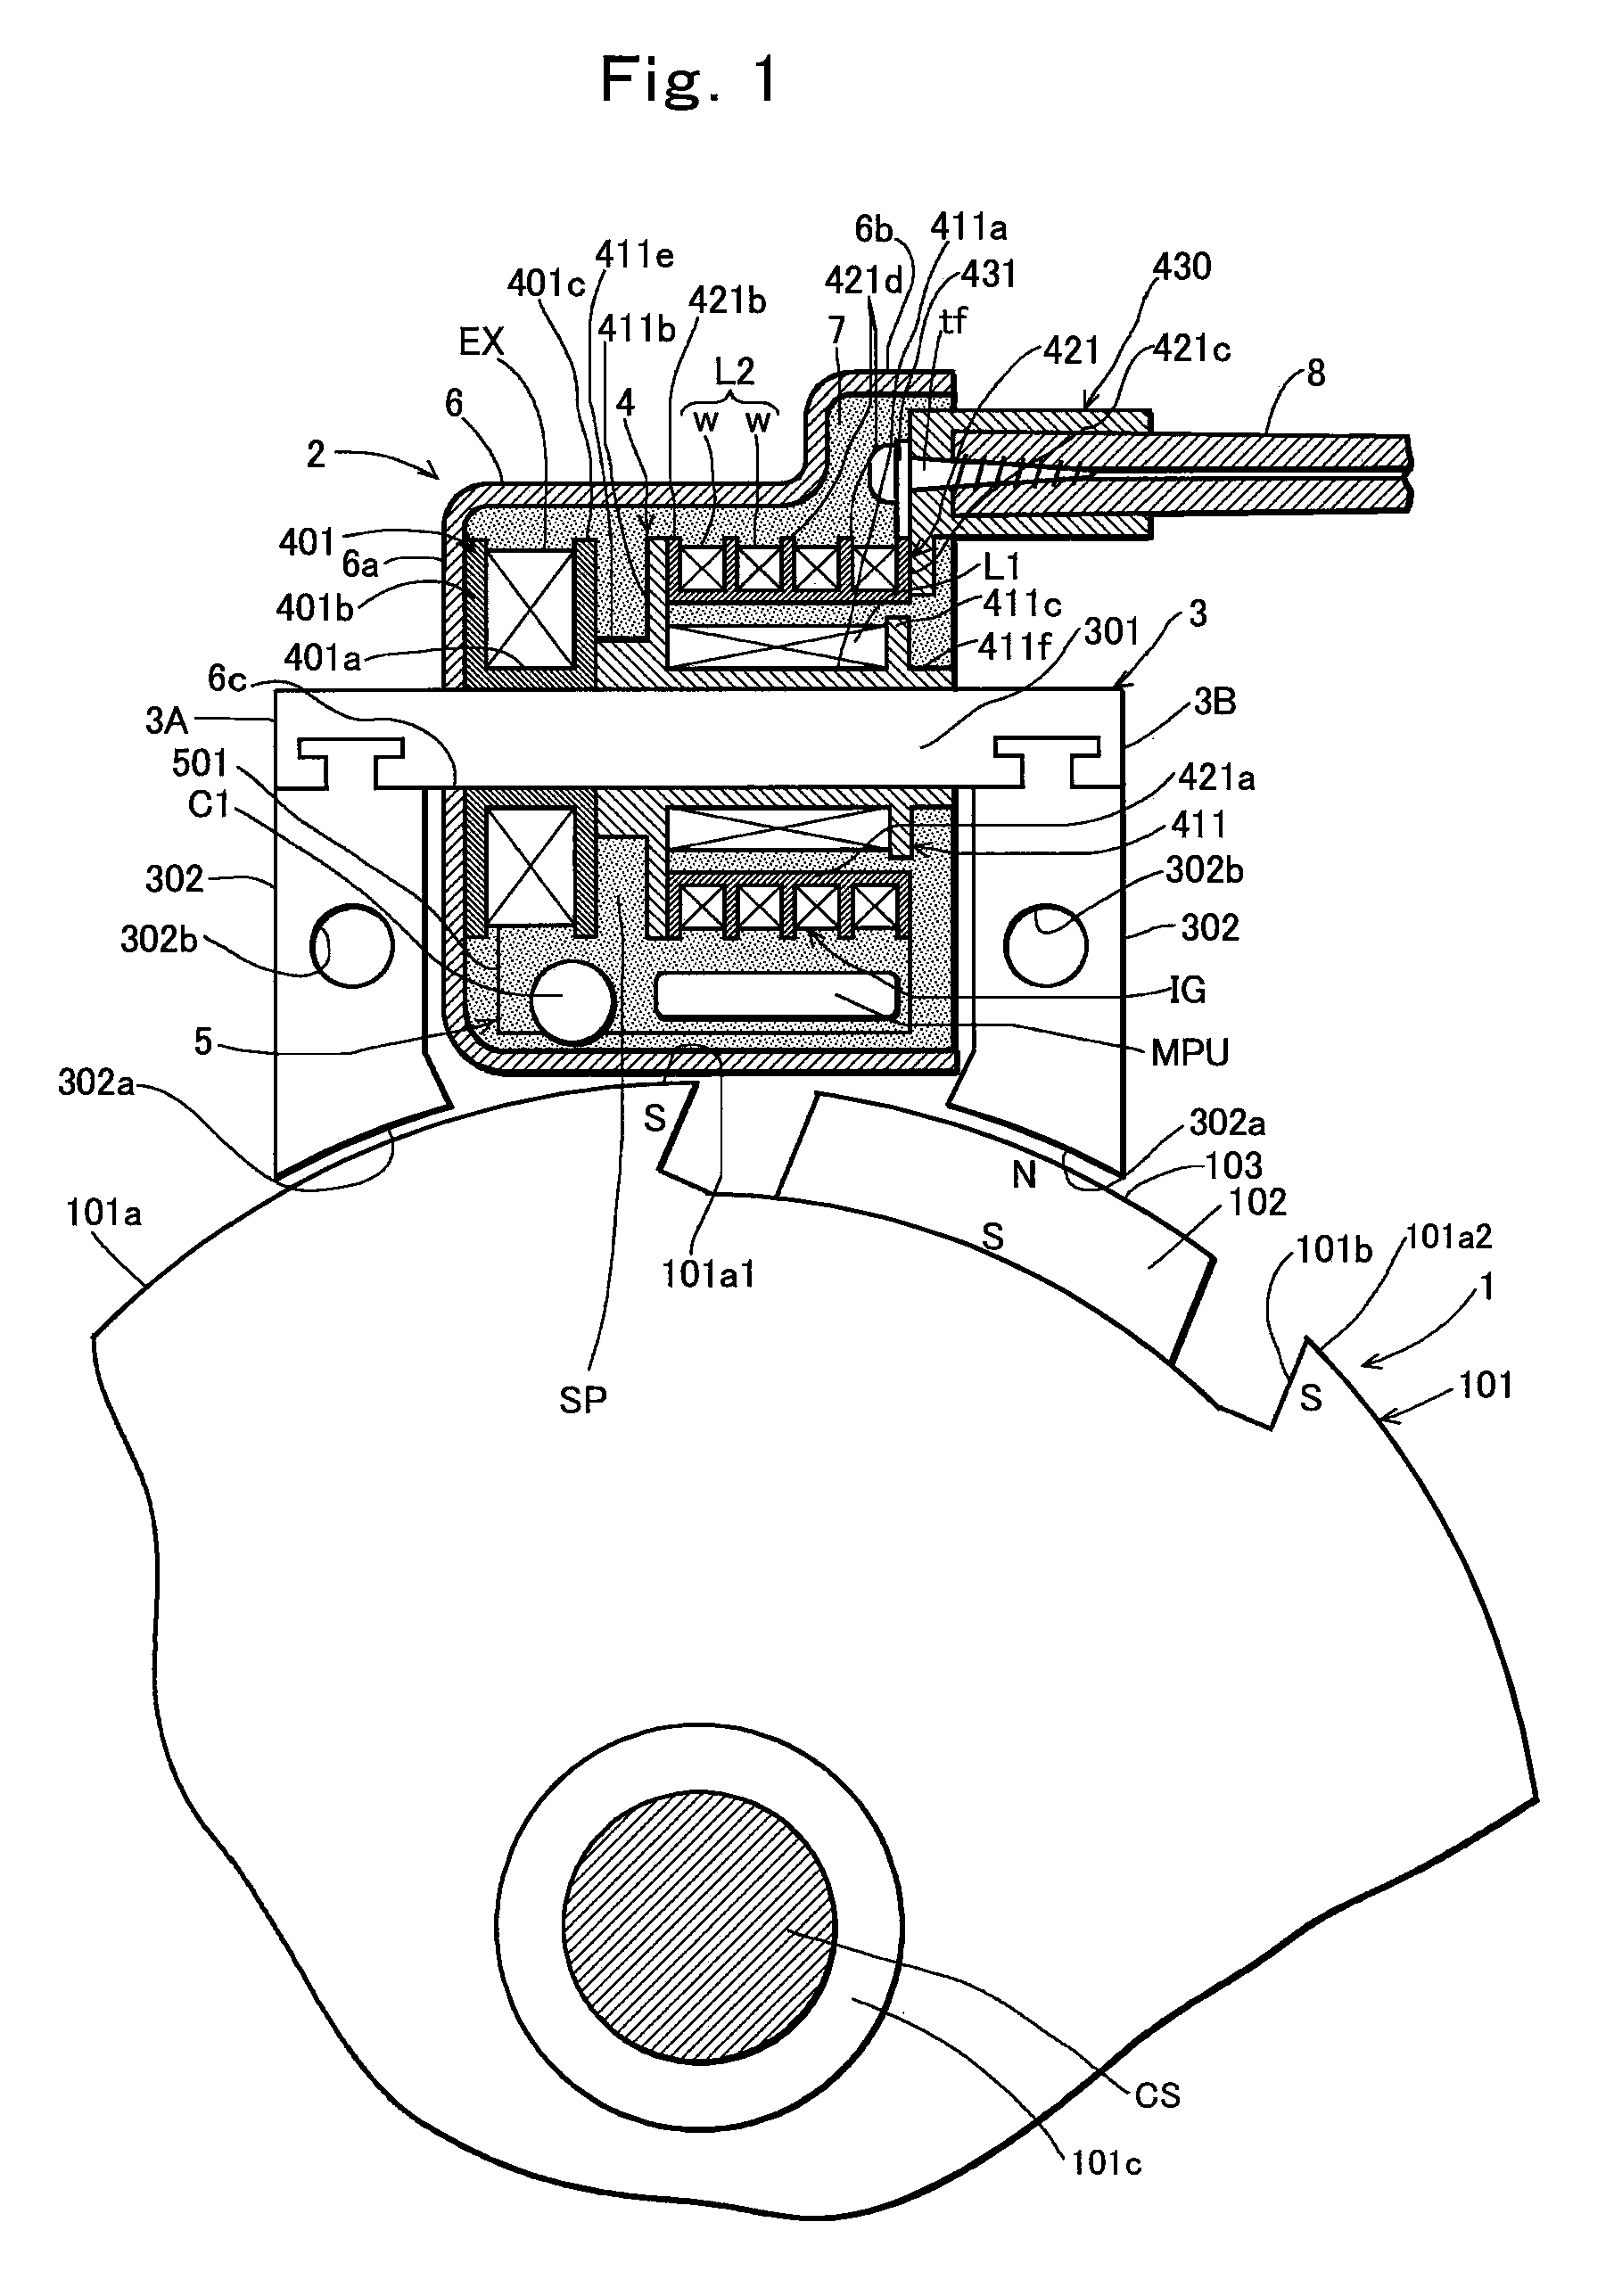 Capacitor discharge engine ignition device